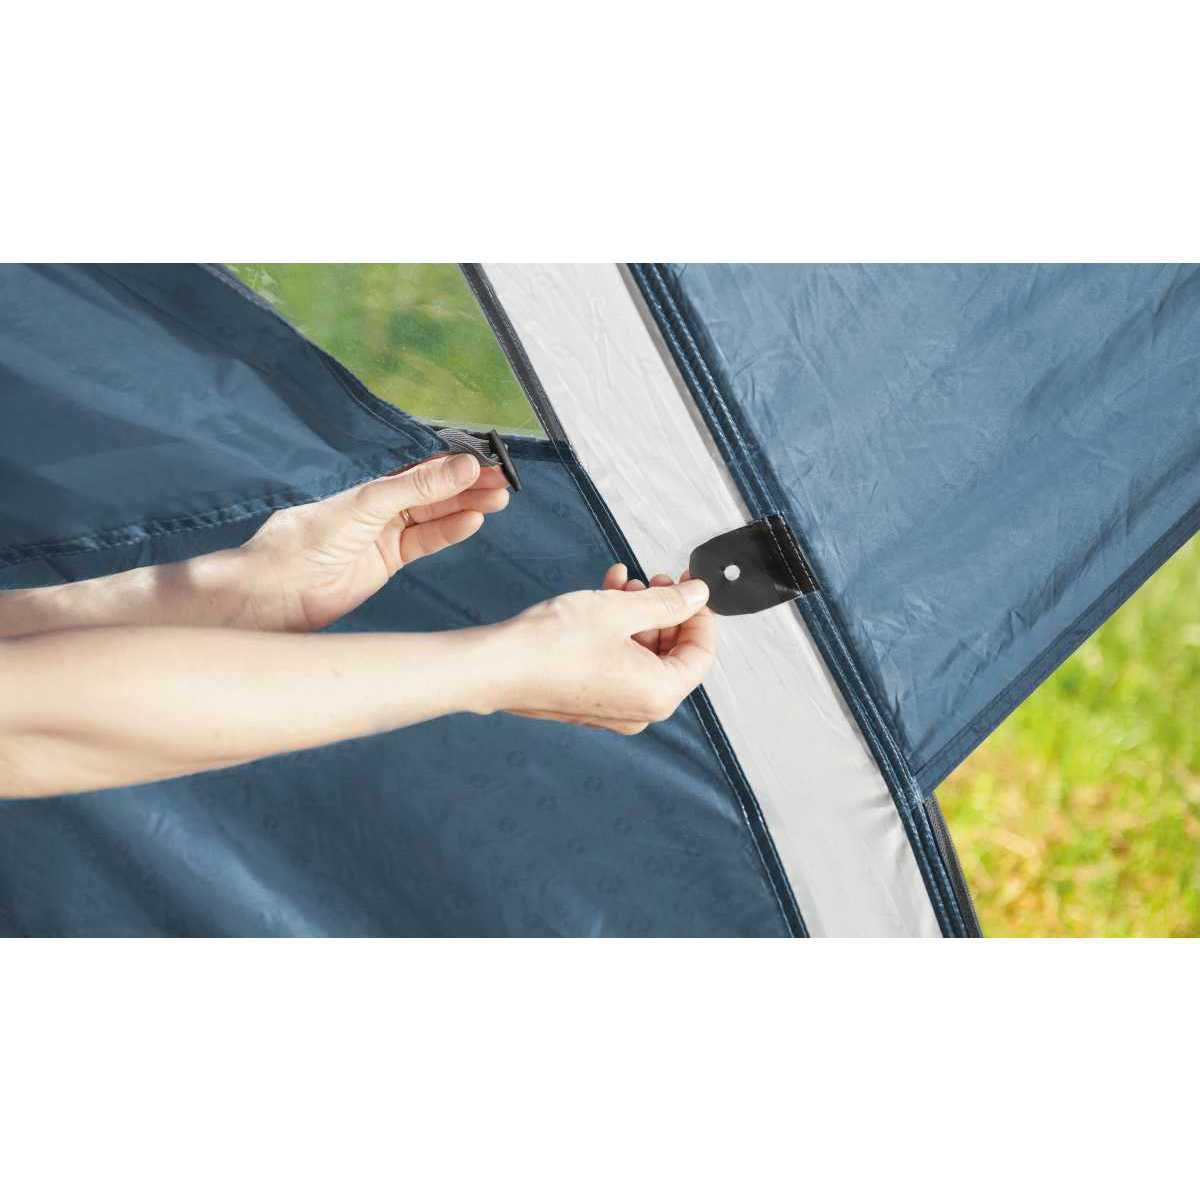 Outwell Campingzelt Cloud 2 - 111255